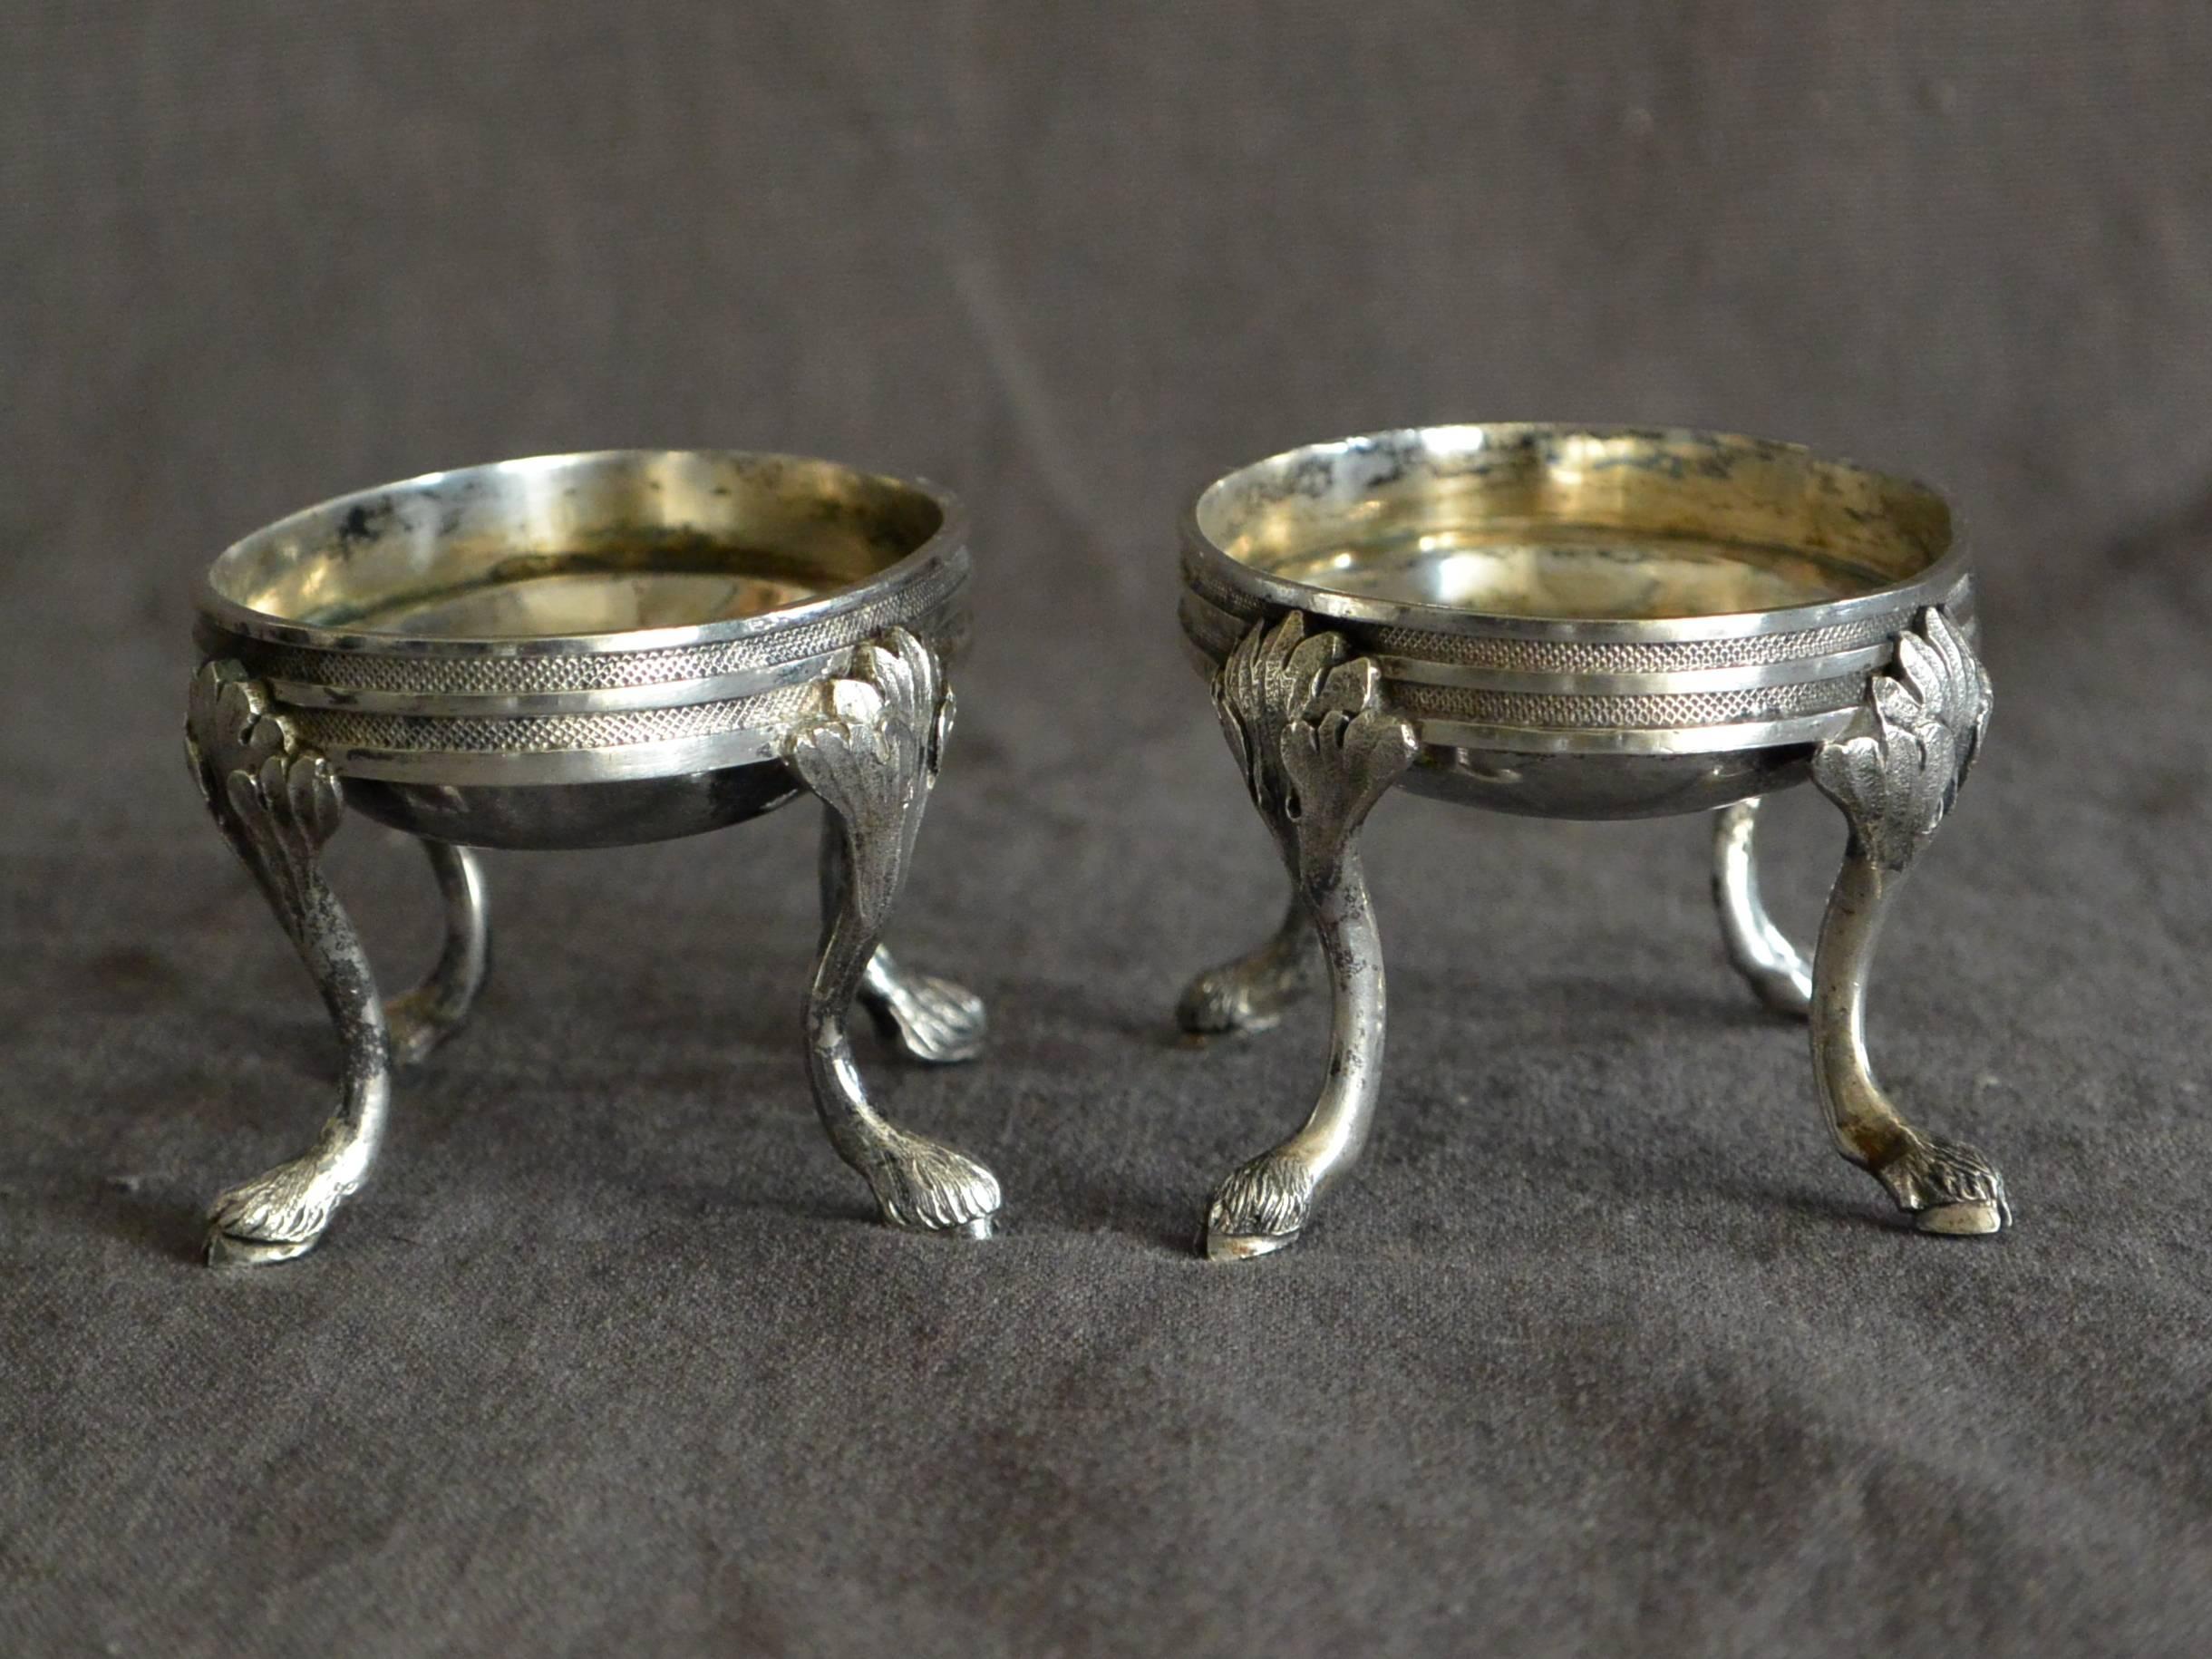 Pair of Austrian silver oval salts. Pair early 19th century Austrian sterling silver oval triple banded and incised salt cellars on foliate legs terminating in hoof feet. Stamps and marks 